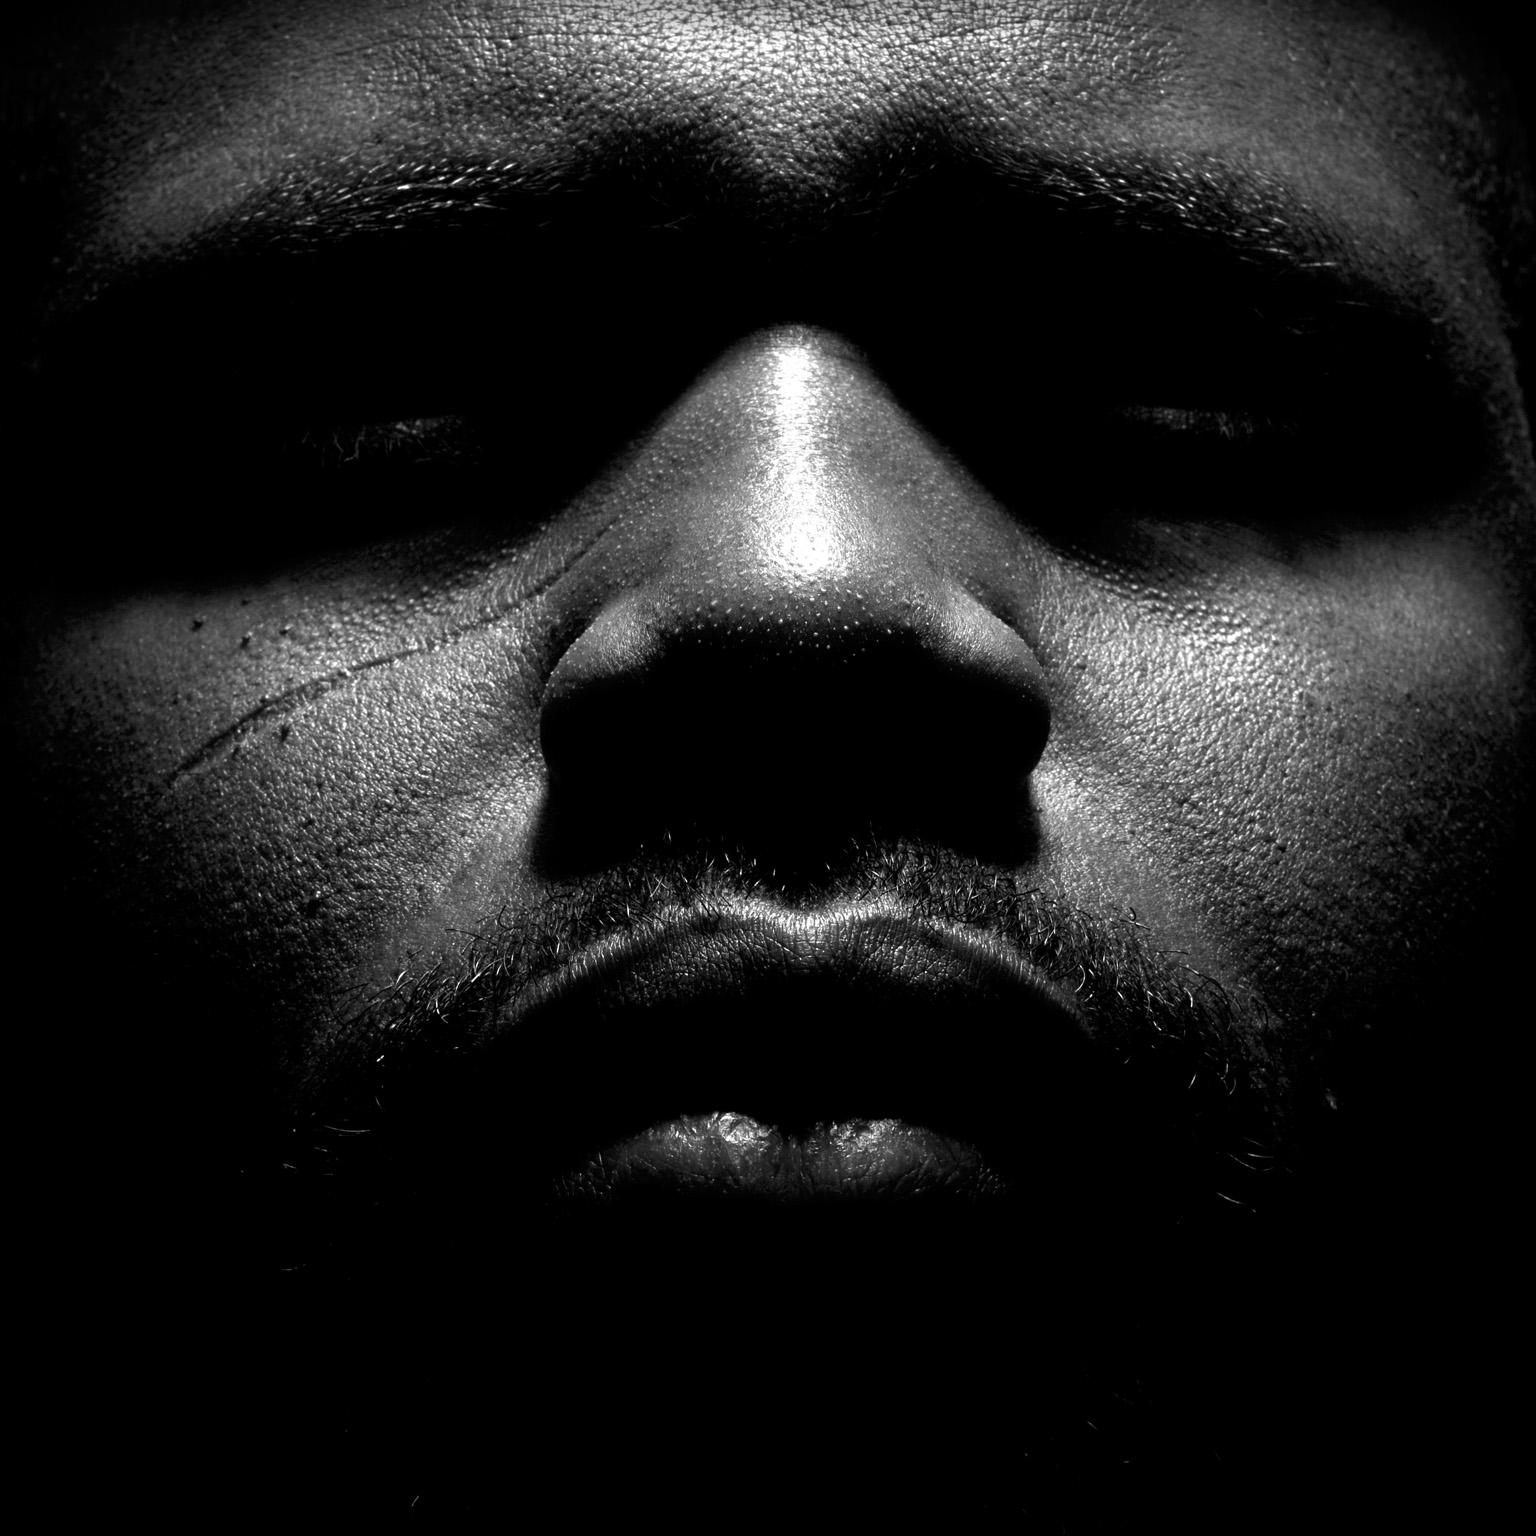 Untitled # 1 2 - 2008 - Expressionist Black and White Portrait of Young Man